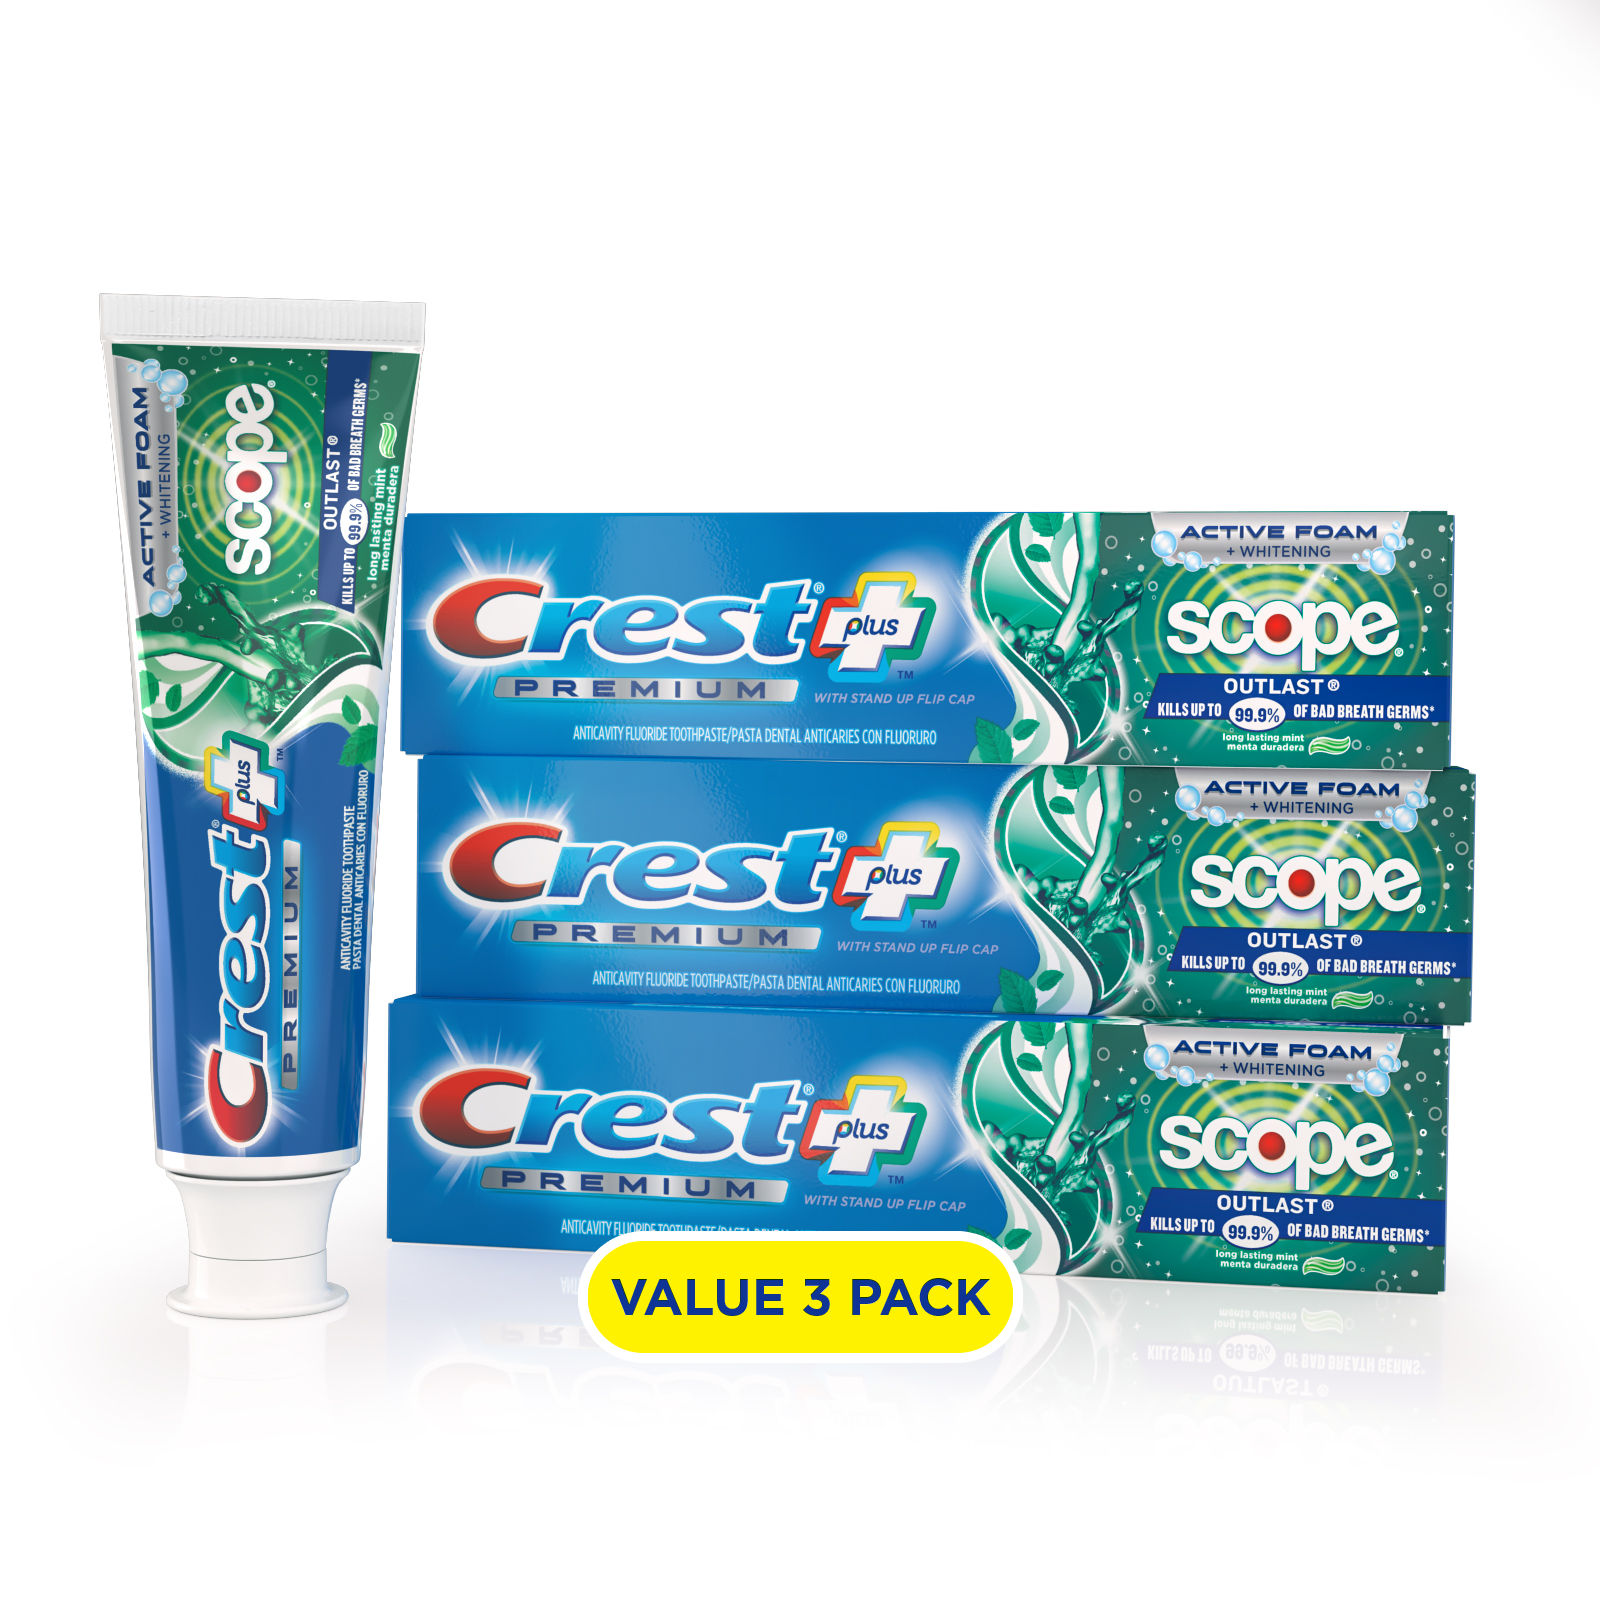 Crest Premium Plus Scope Outlast Toothpaste, Long Lasting Mint Flavor 5.2 oz, Pack of 3 - image 2 of 11